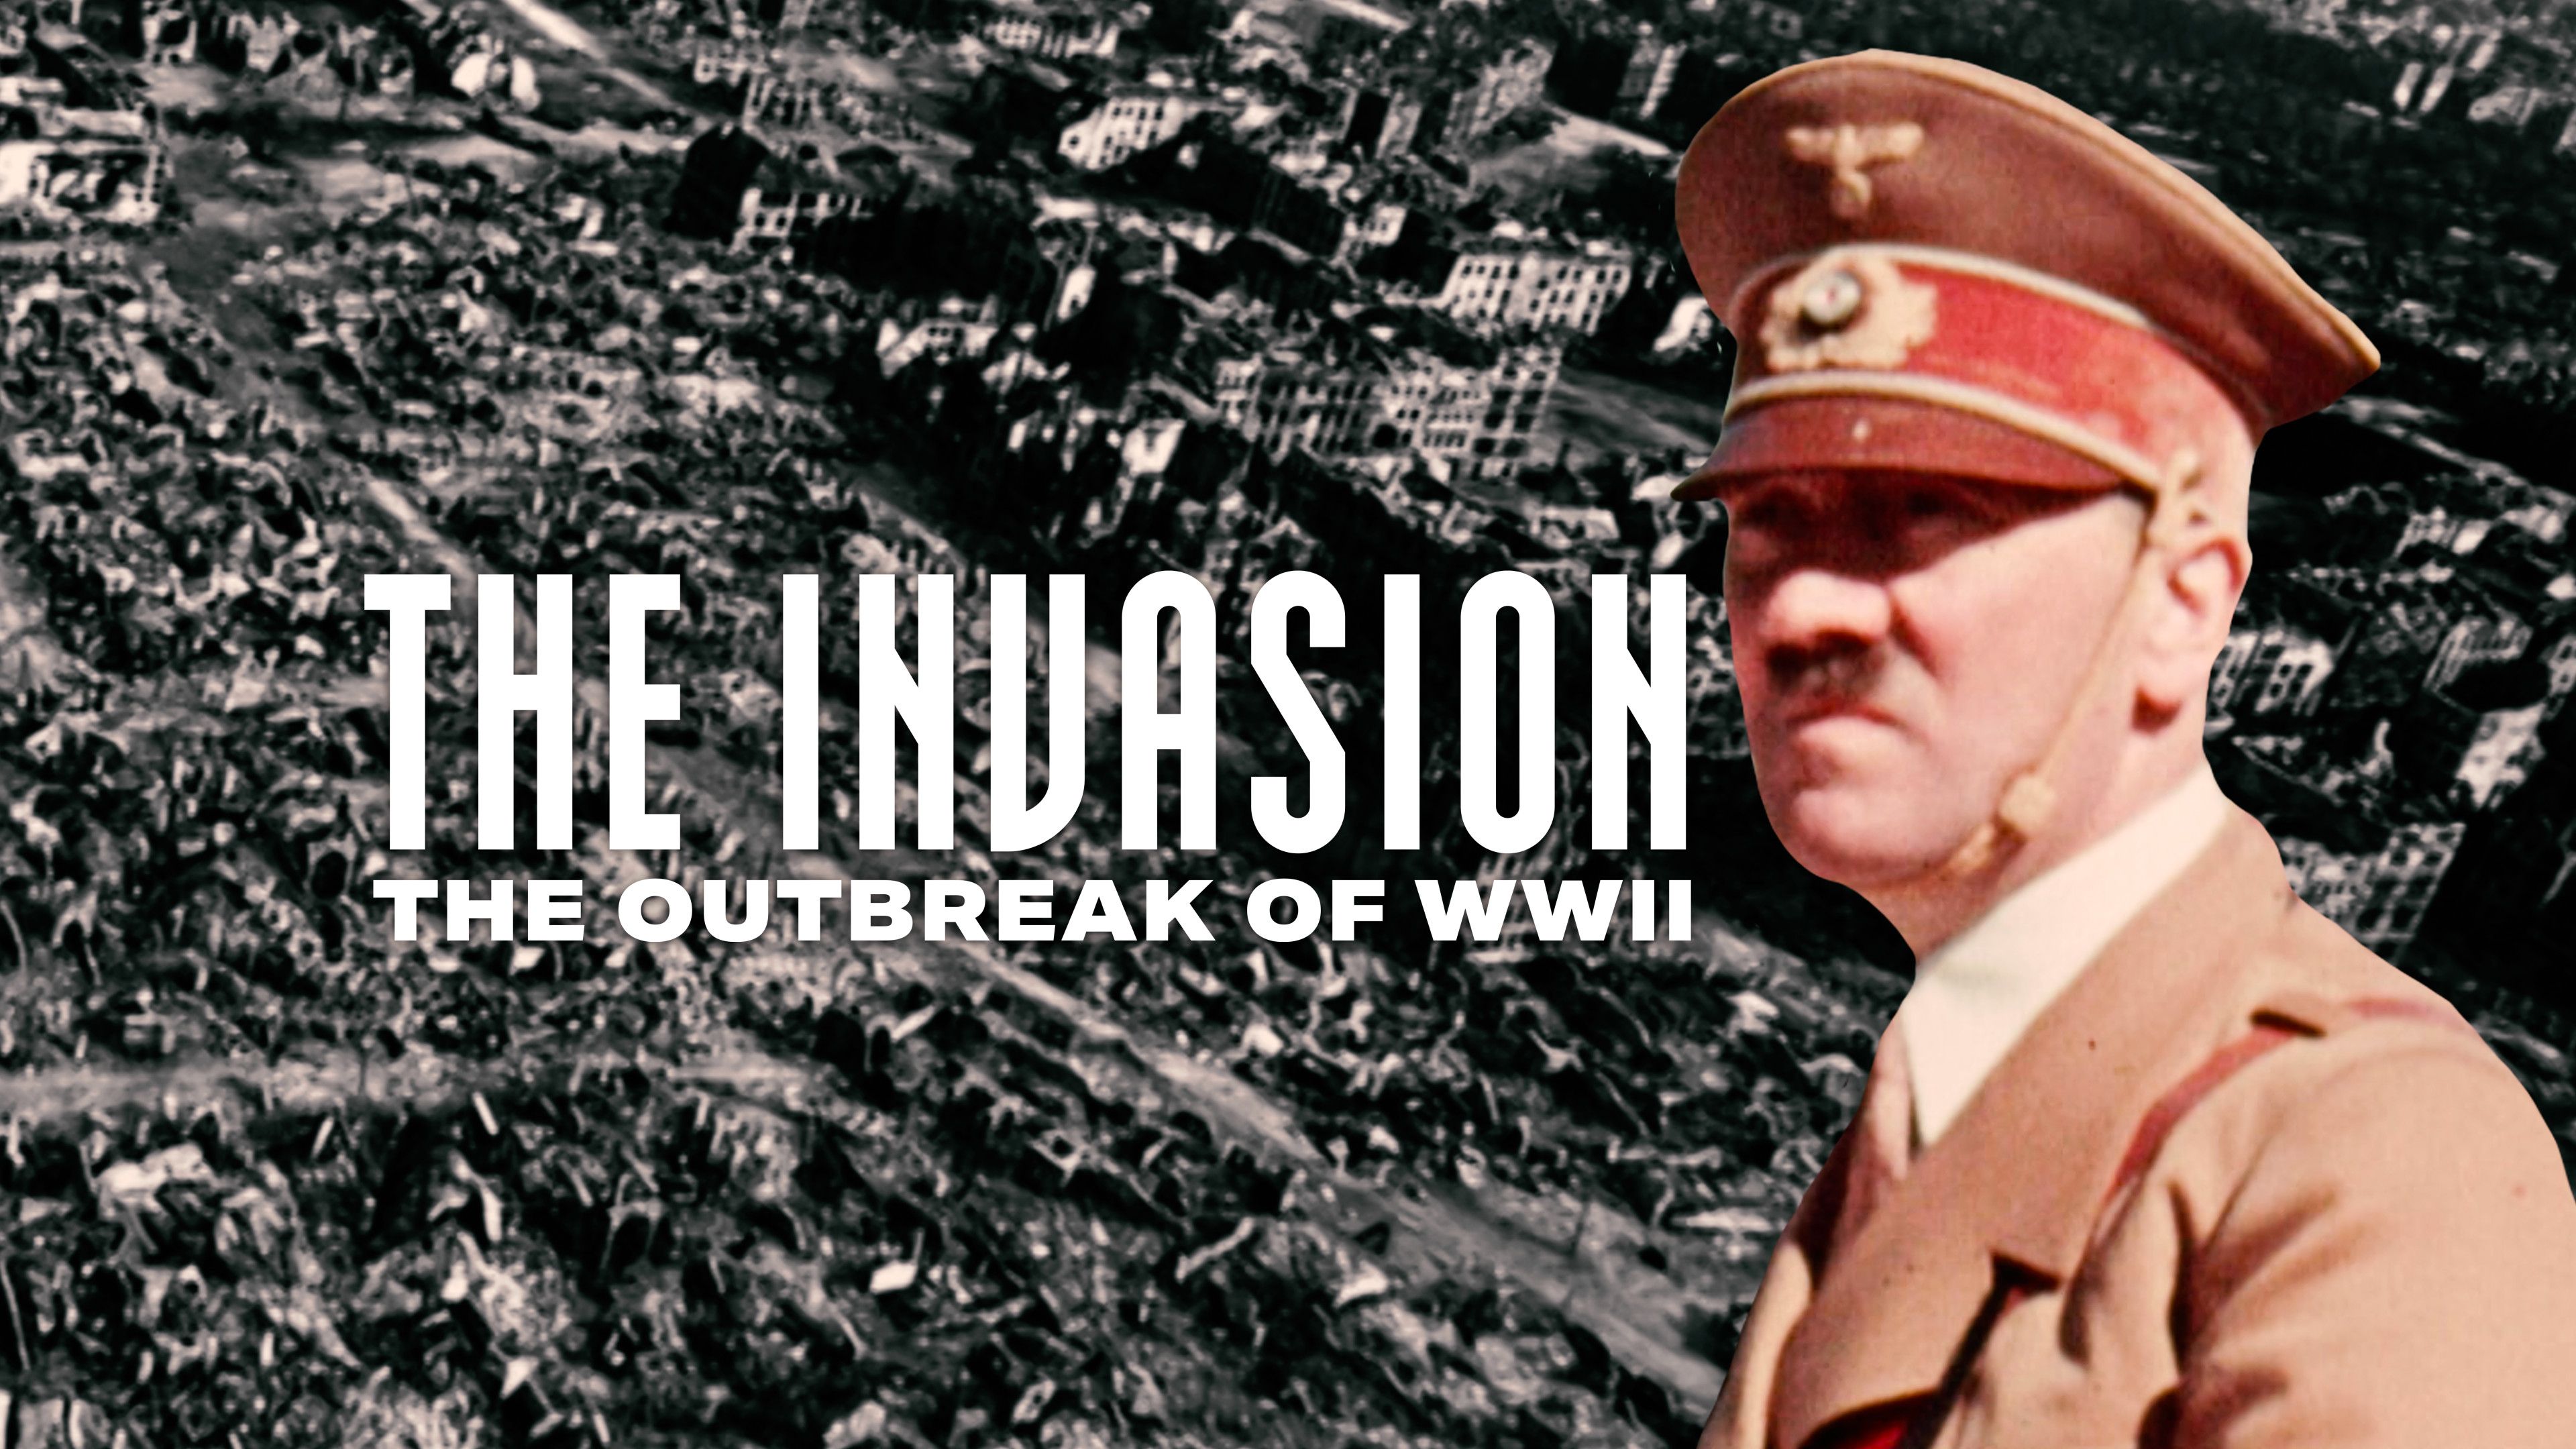 The Invasion: The Outbreak of WWII